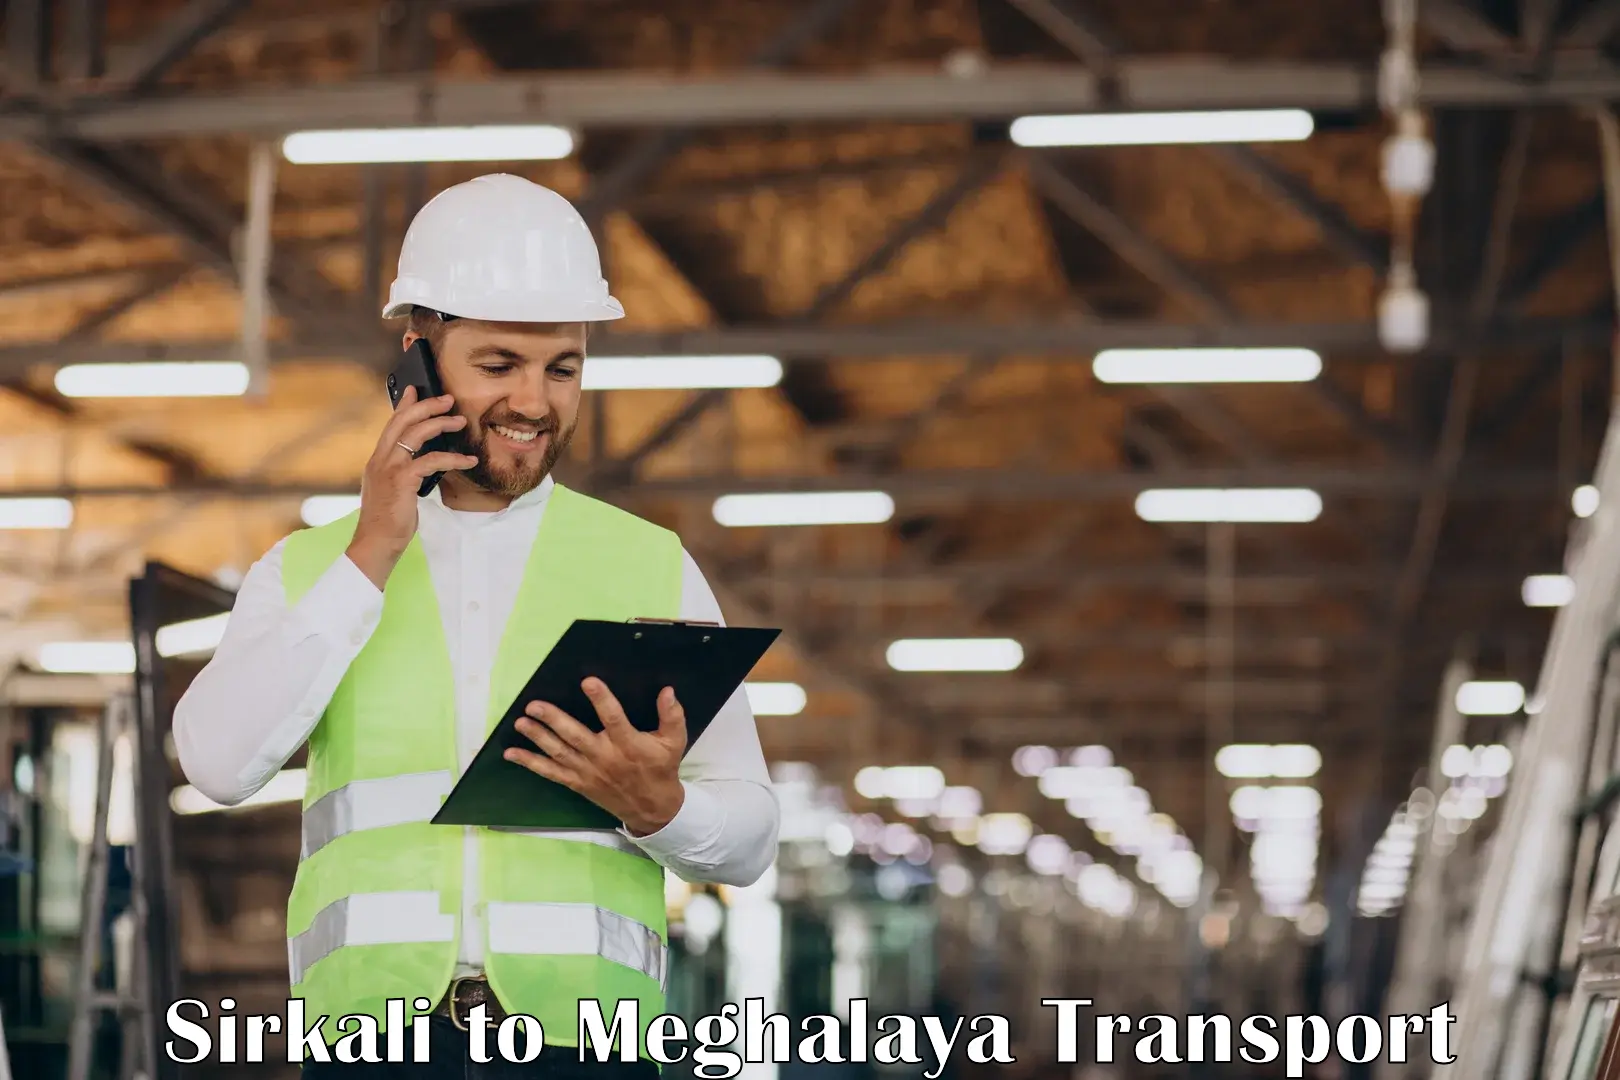 Goods delivery service Sirkali to Meghalaya